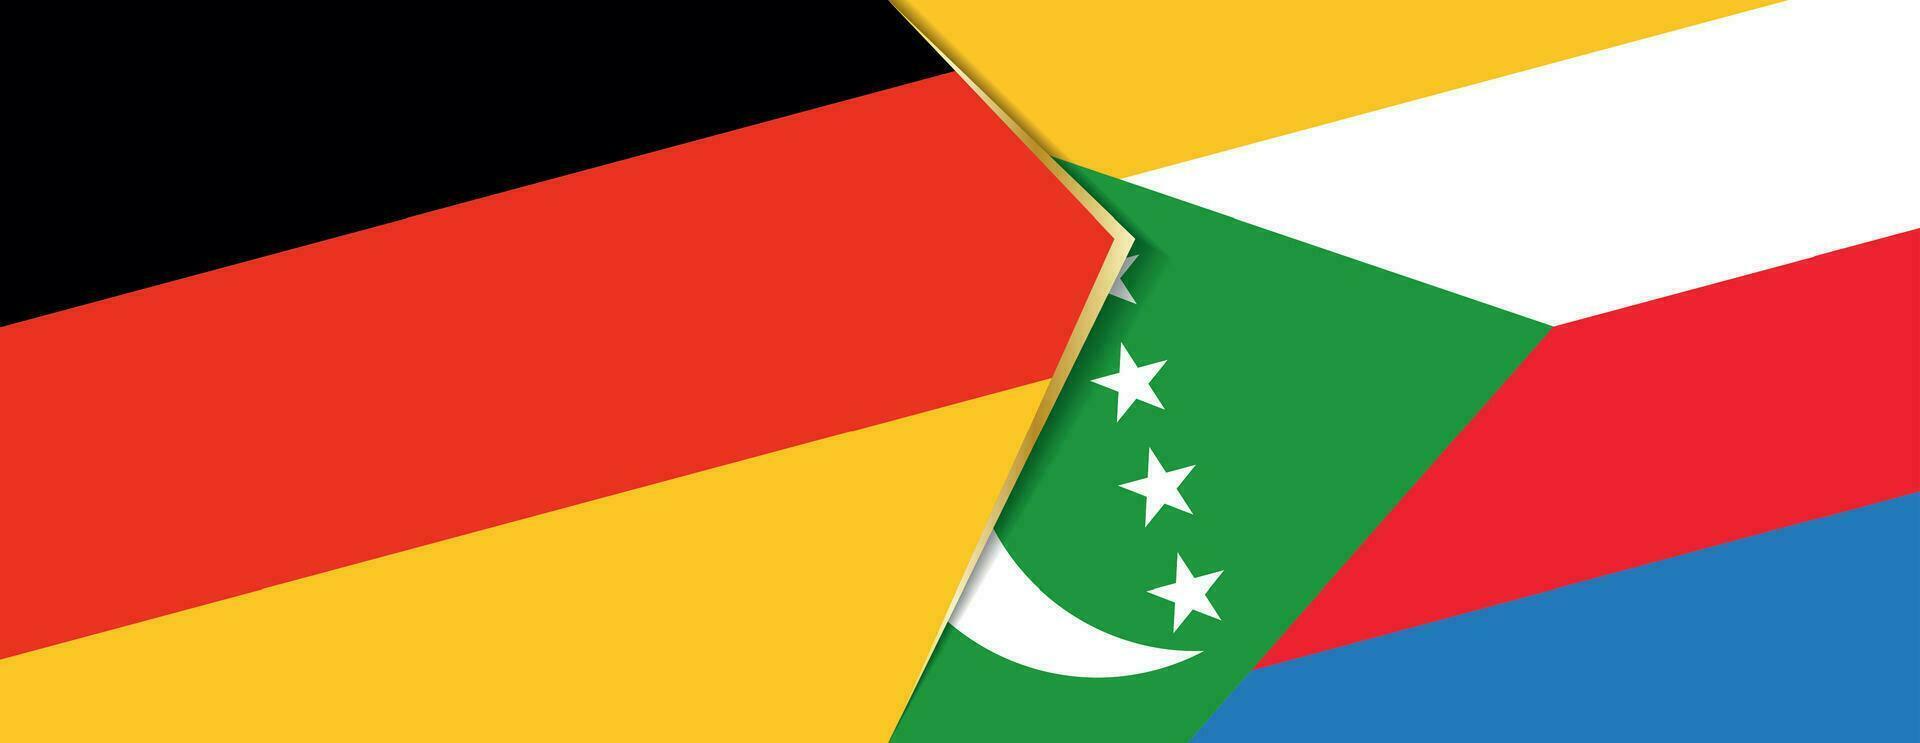 Germany and Comoros flags, two vector flags.